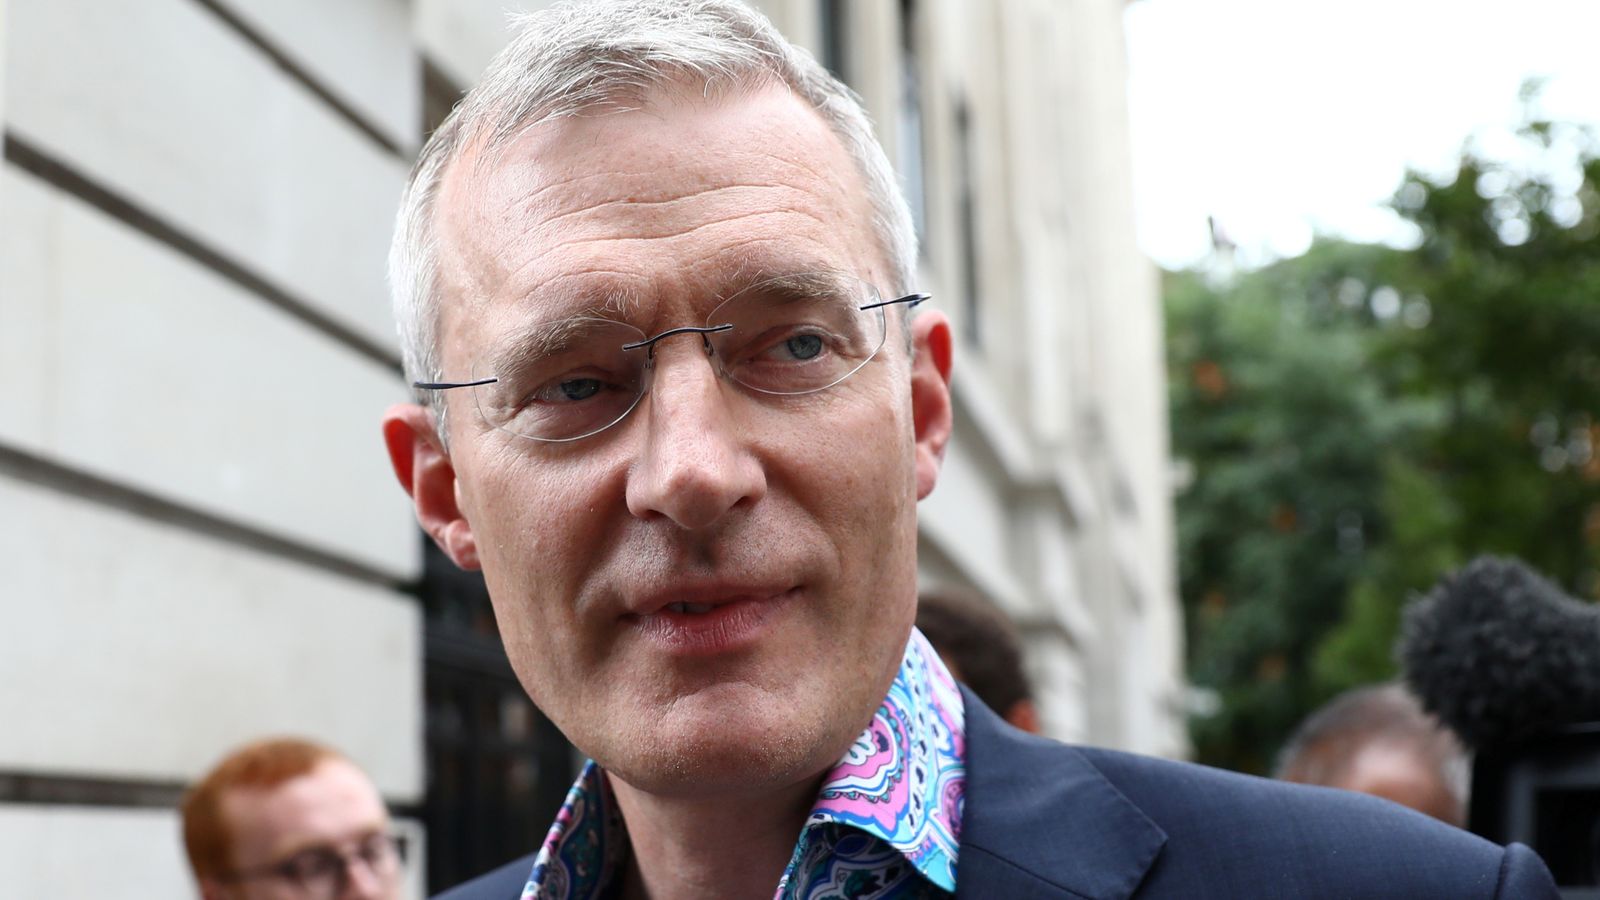 Huw Edwards allegations: Twitter user who falsely named Jeremy Vine as accused BBC star agrees to donate £1k to charity 